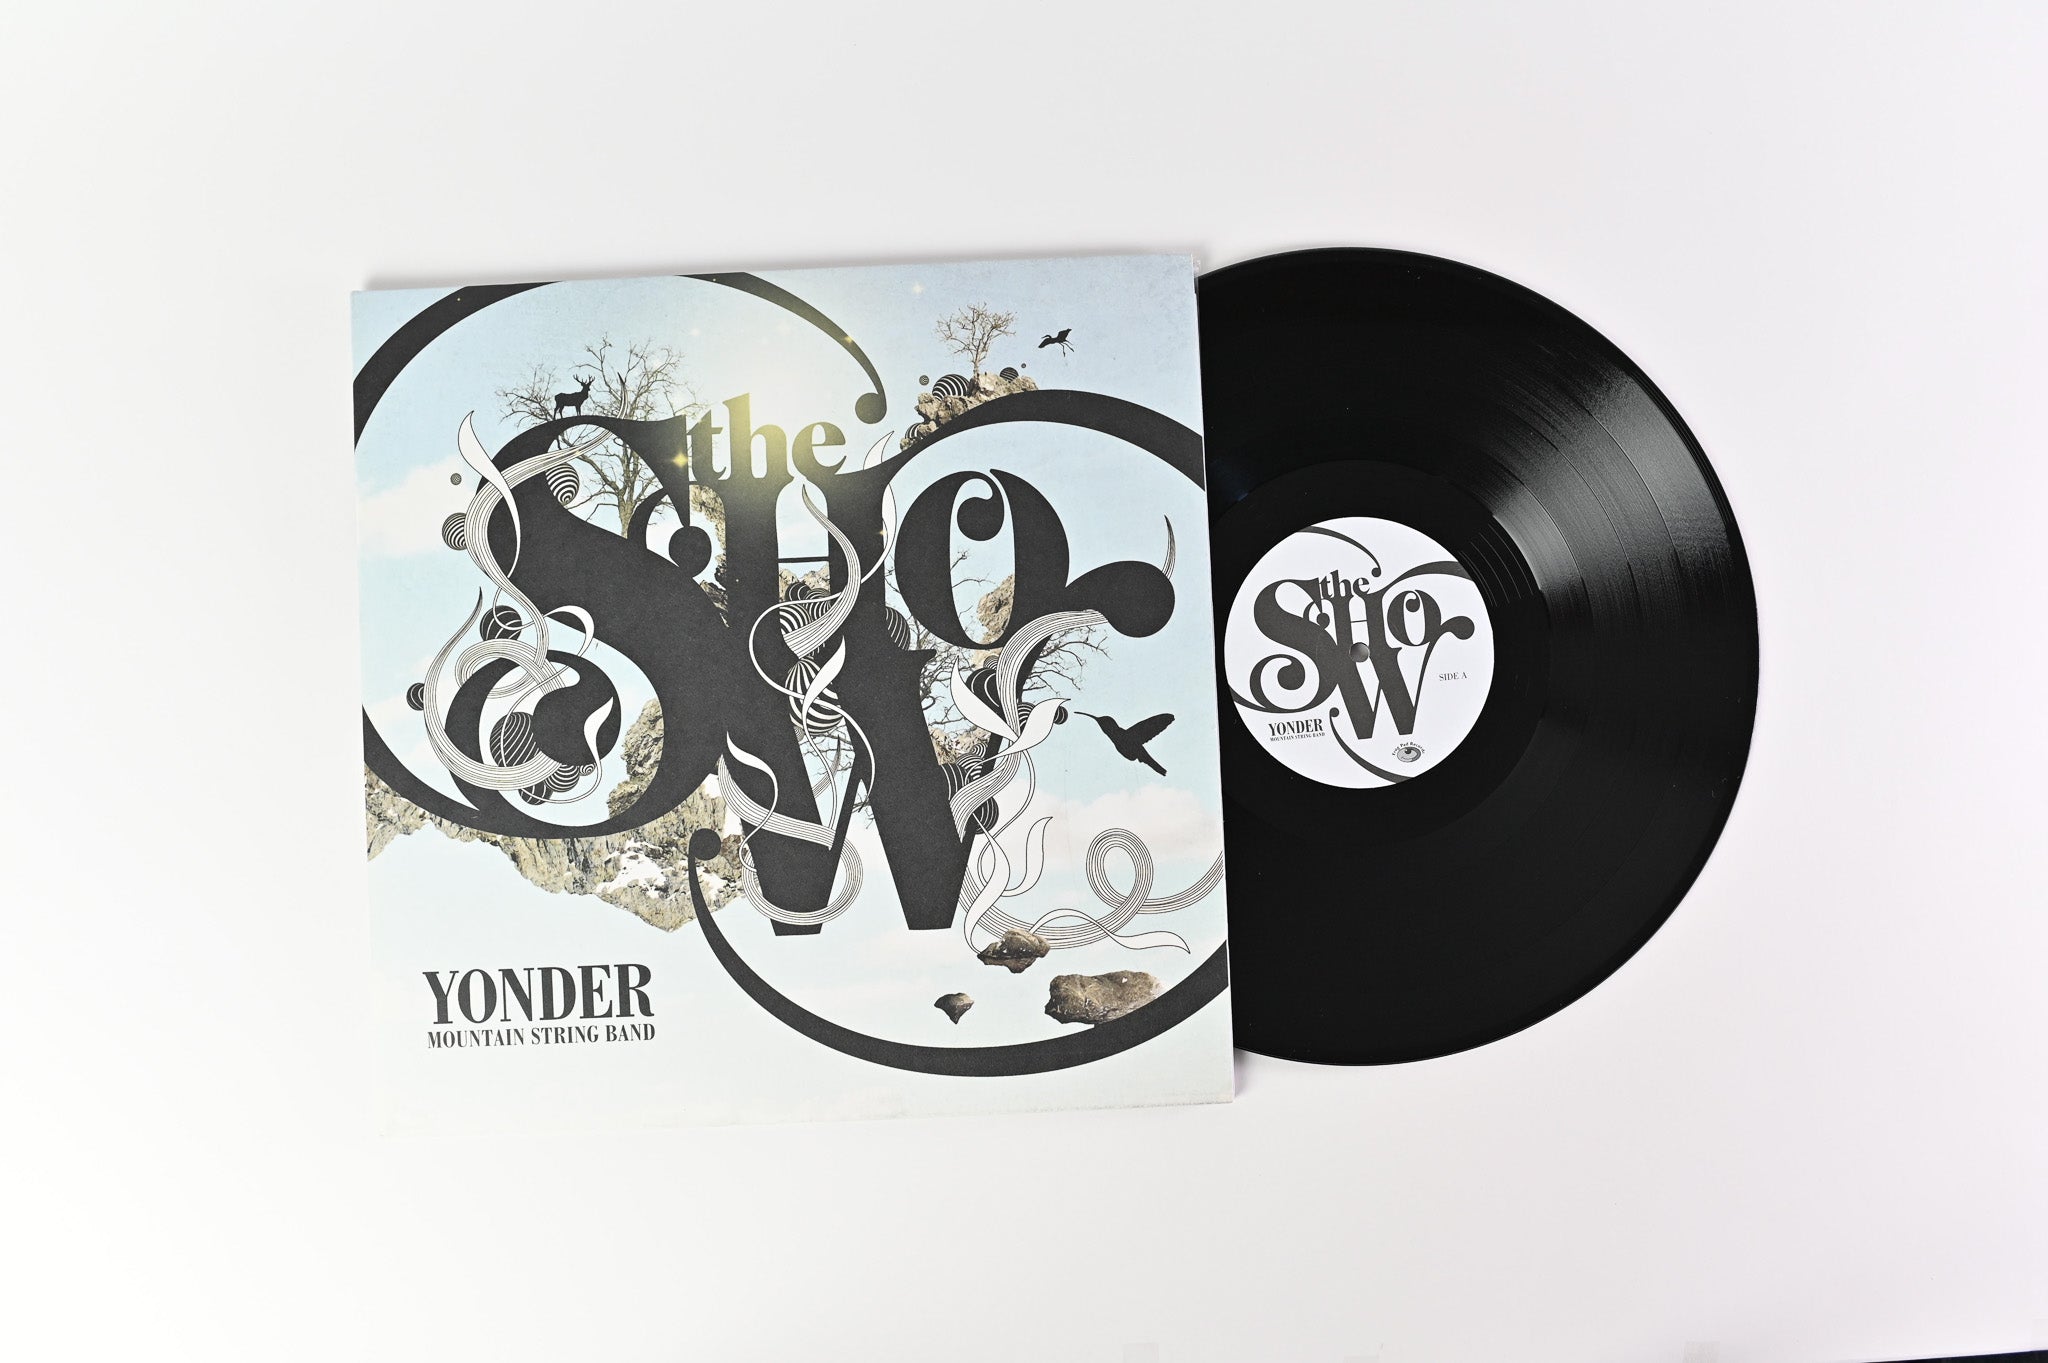 Yonder Mountain String Band - The Show on Frog Pad Records